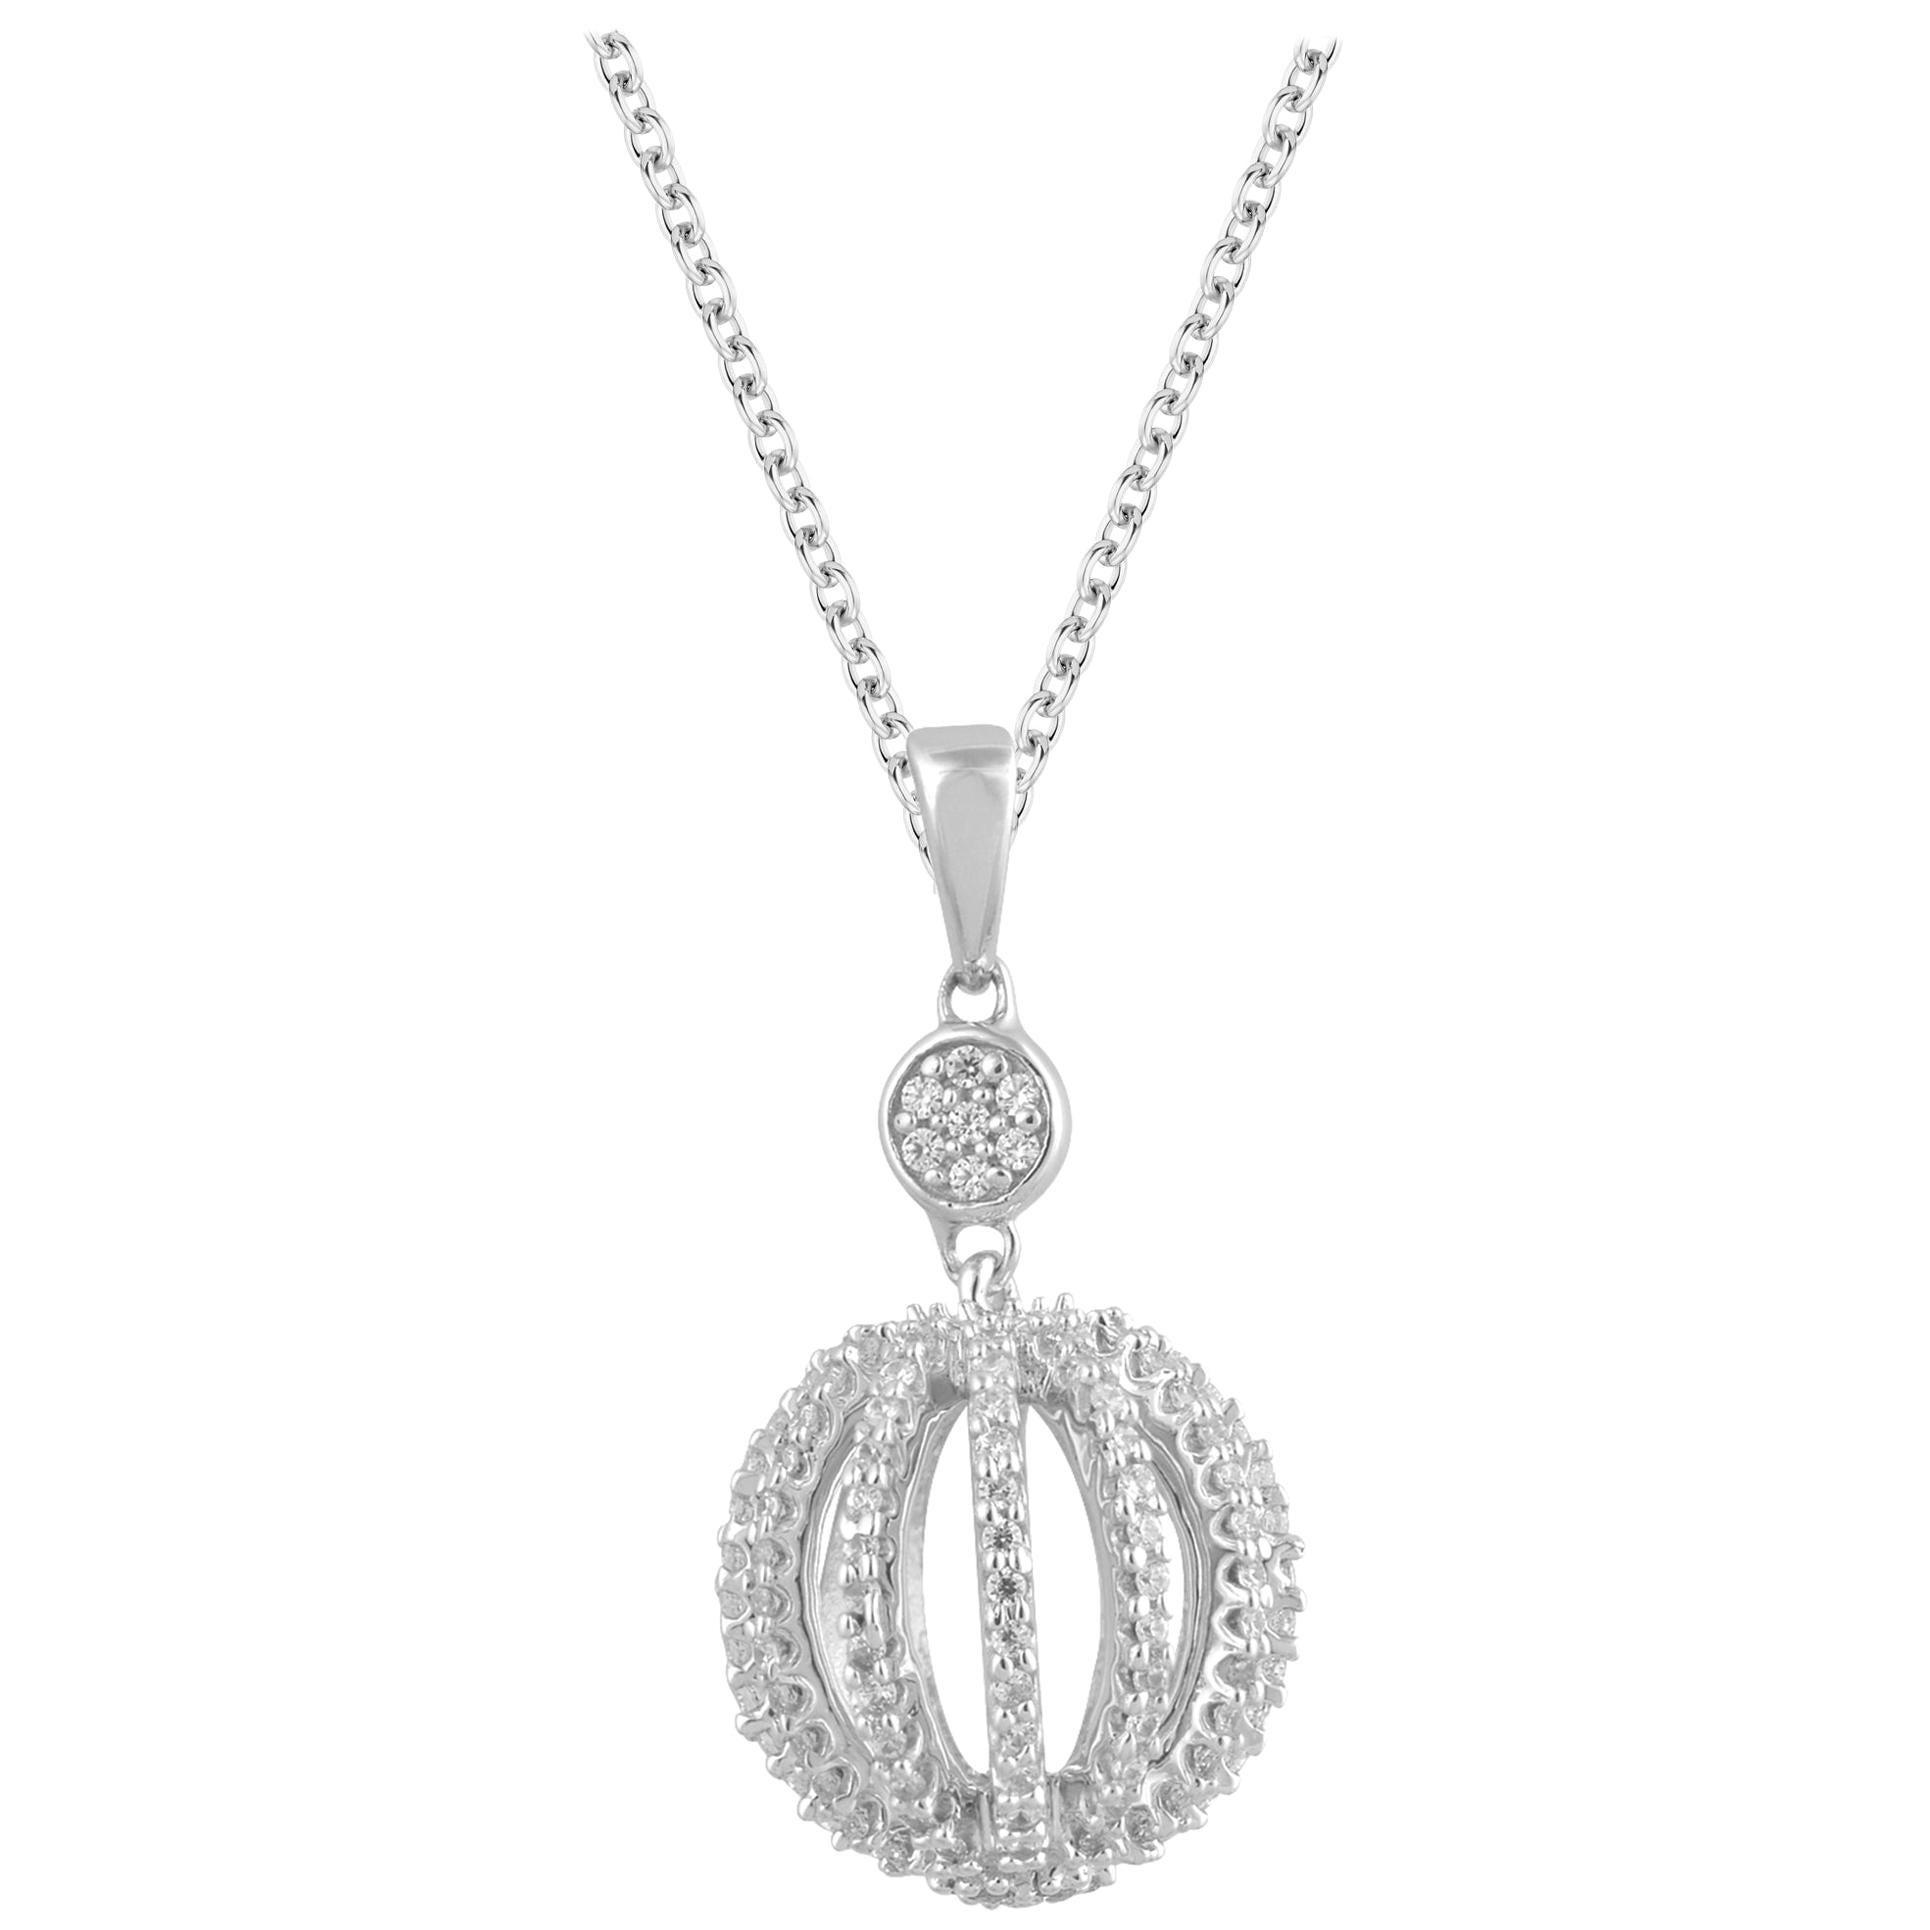 TJD 0.35 Carat Diamond 14 K White Gold Glowing Ball Pendant with 18 inch chain For Sale